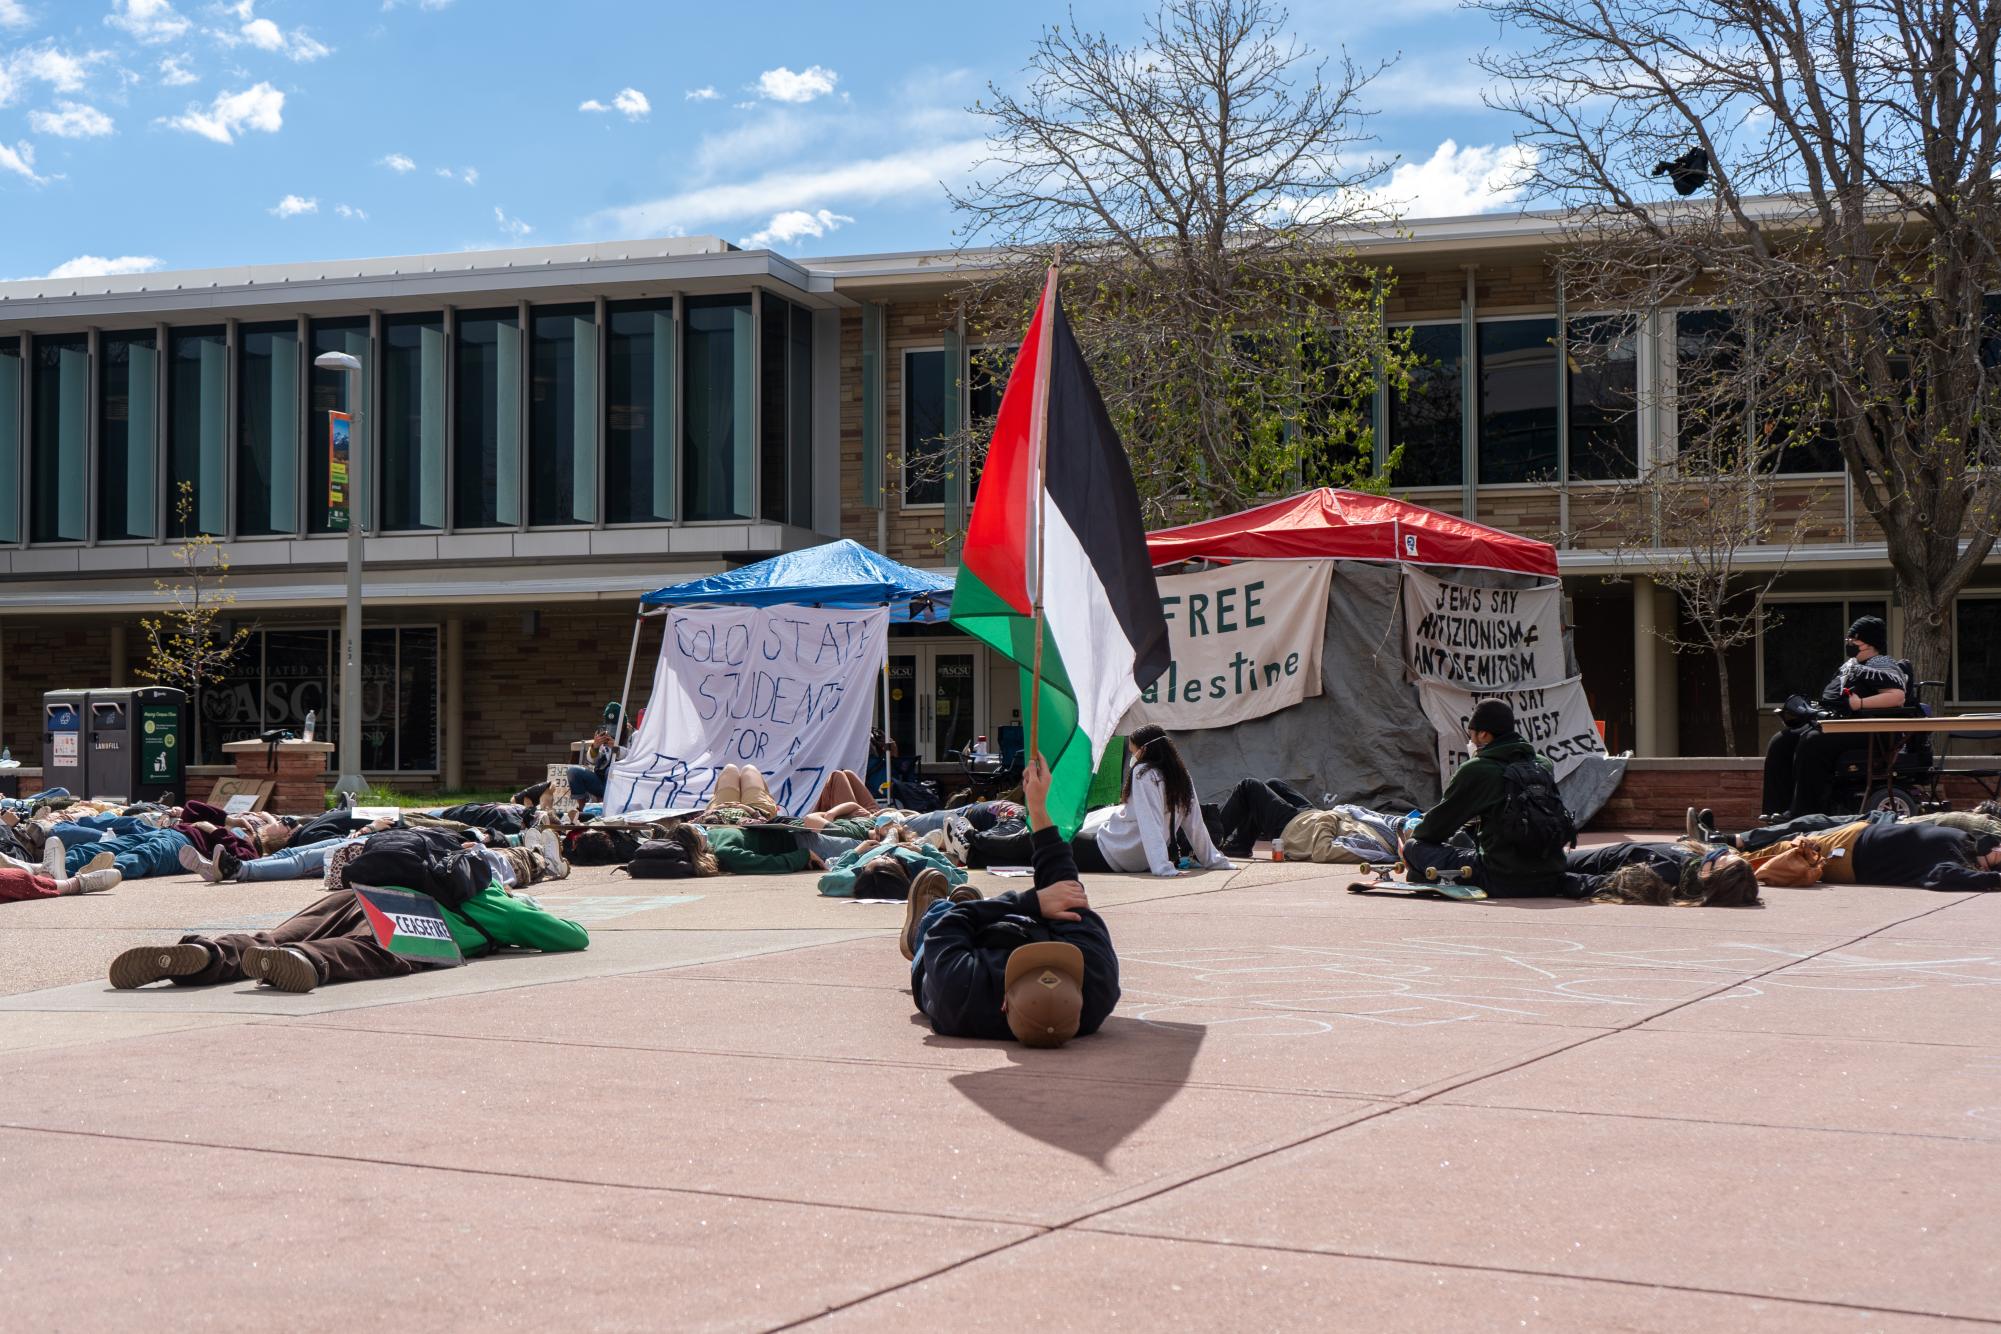 Campus+protests+continue+calling+for+ceasefire+in+Gaza